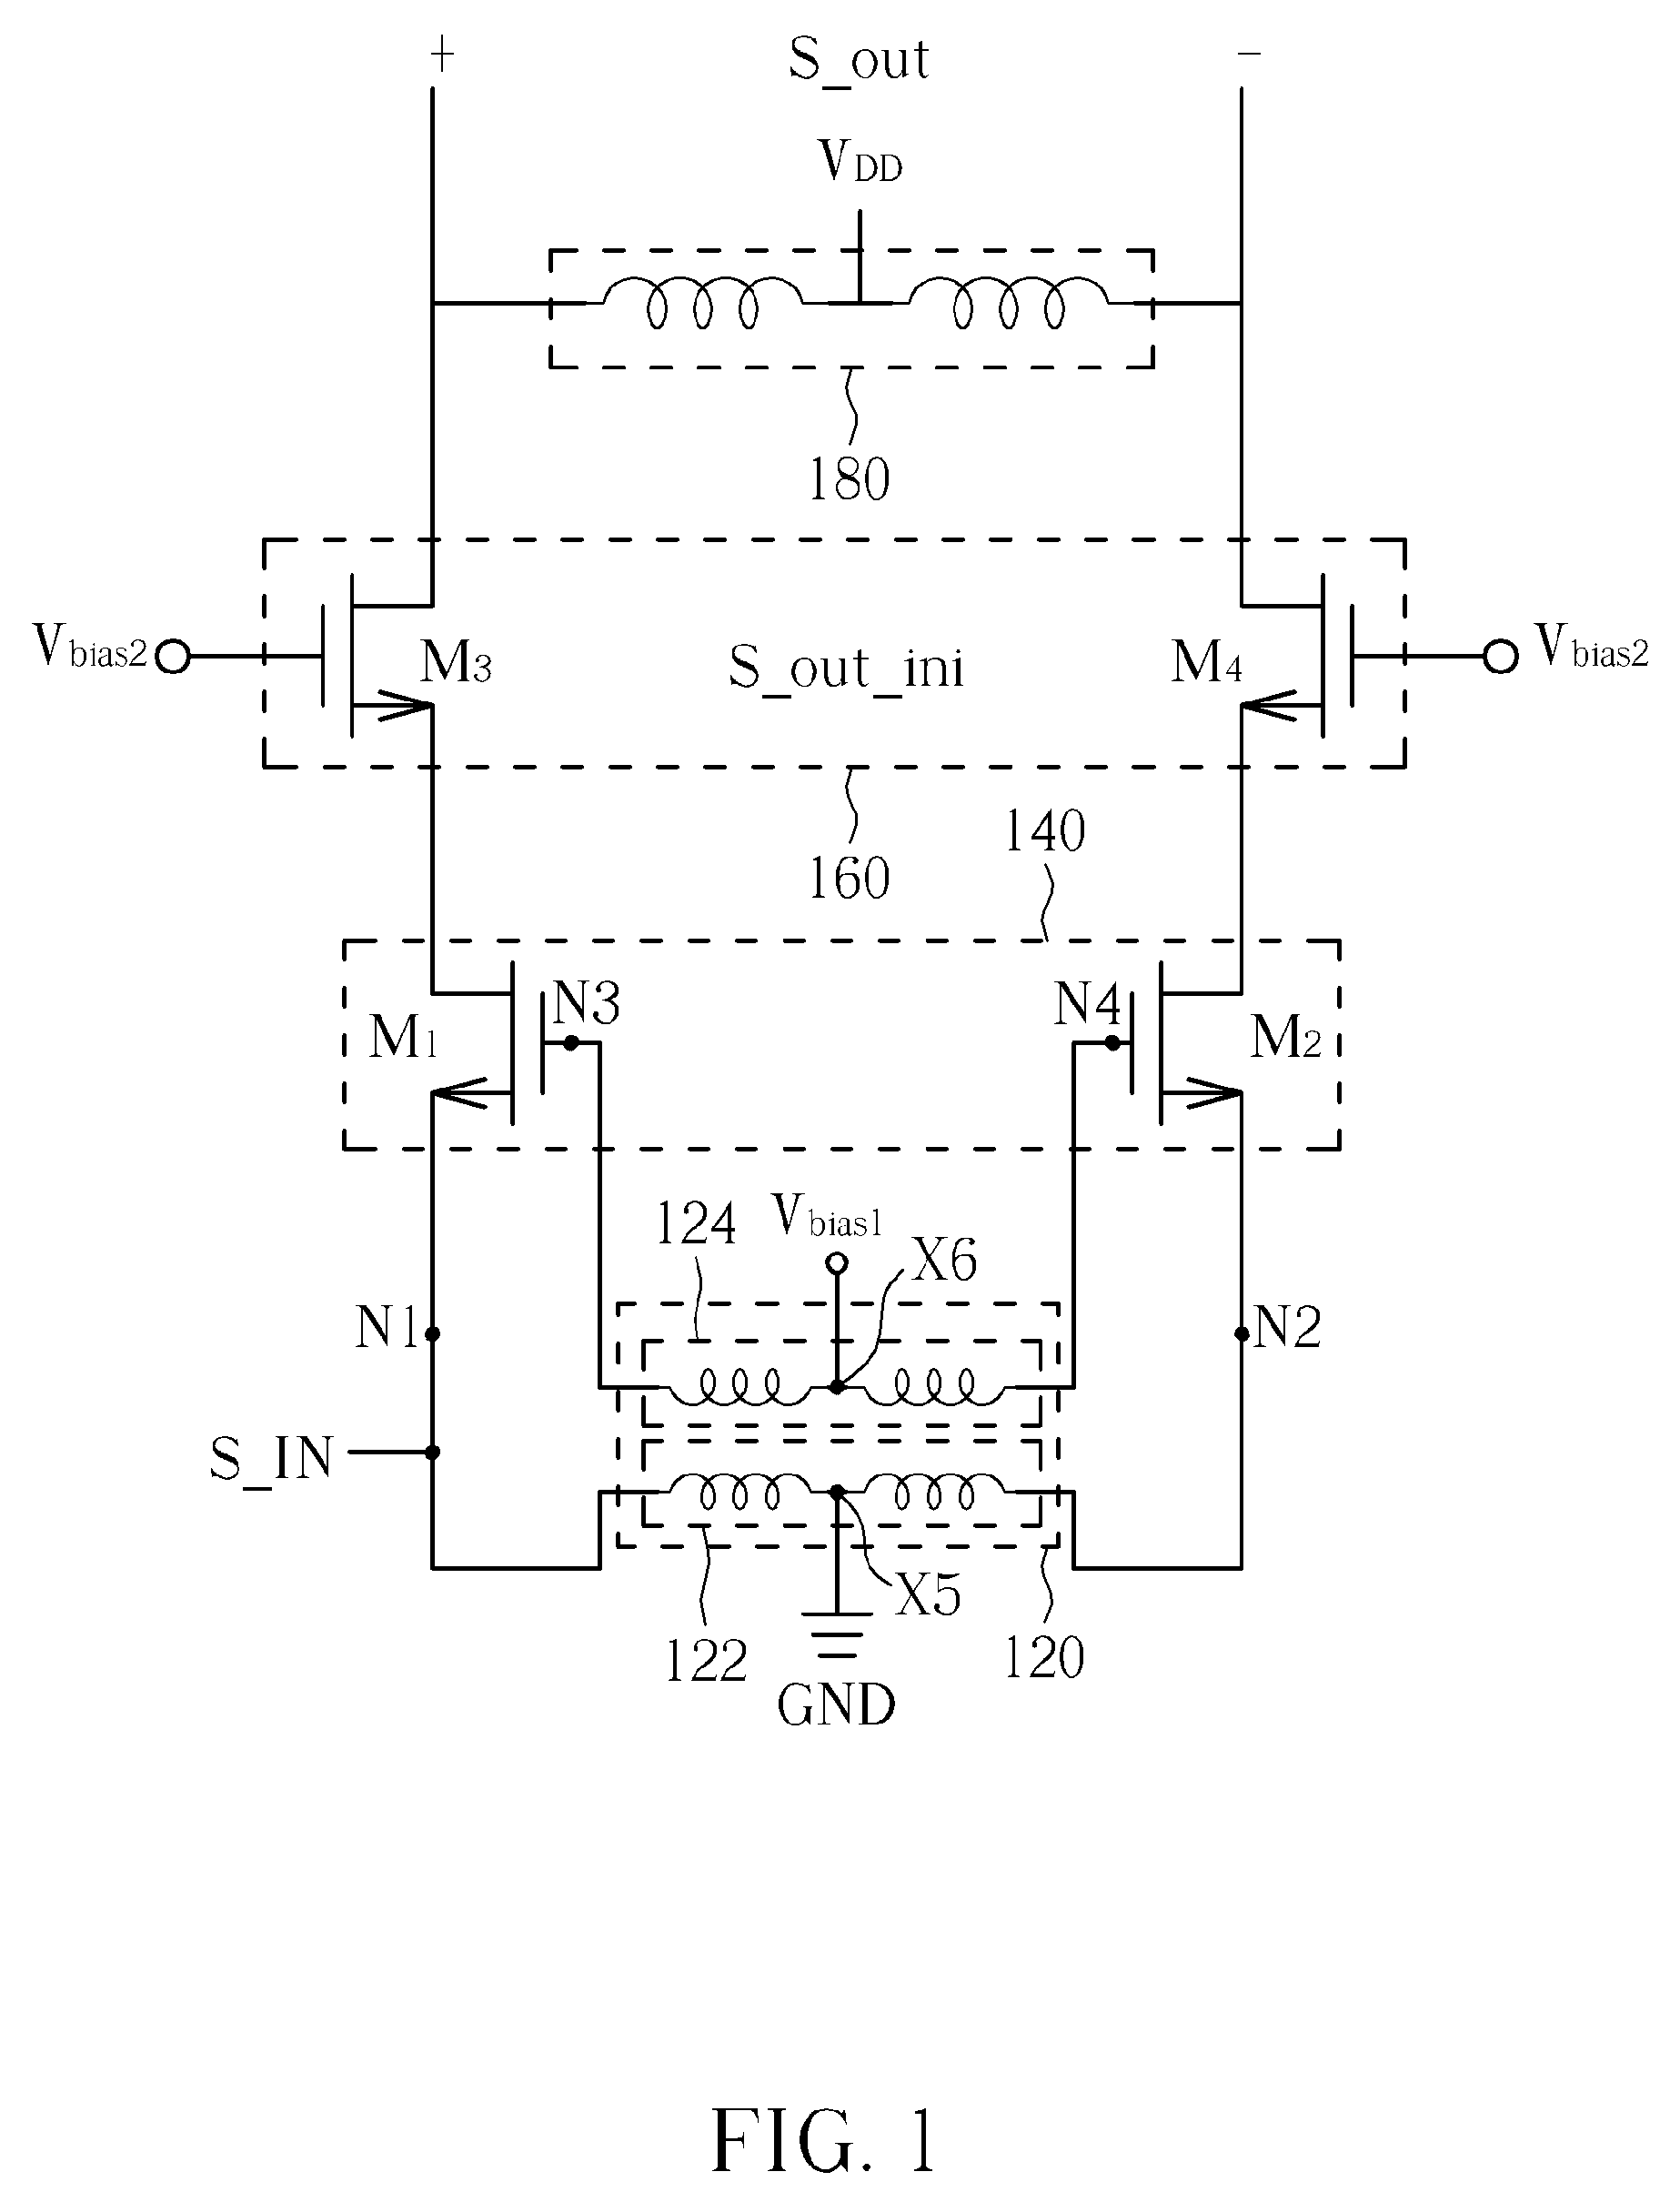 Amplifier with gain circuit coupeld to primary coil of transformer